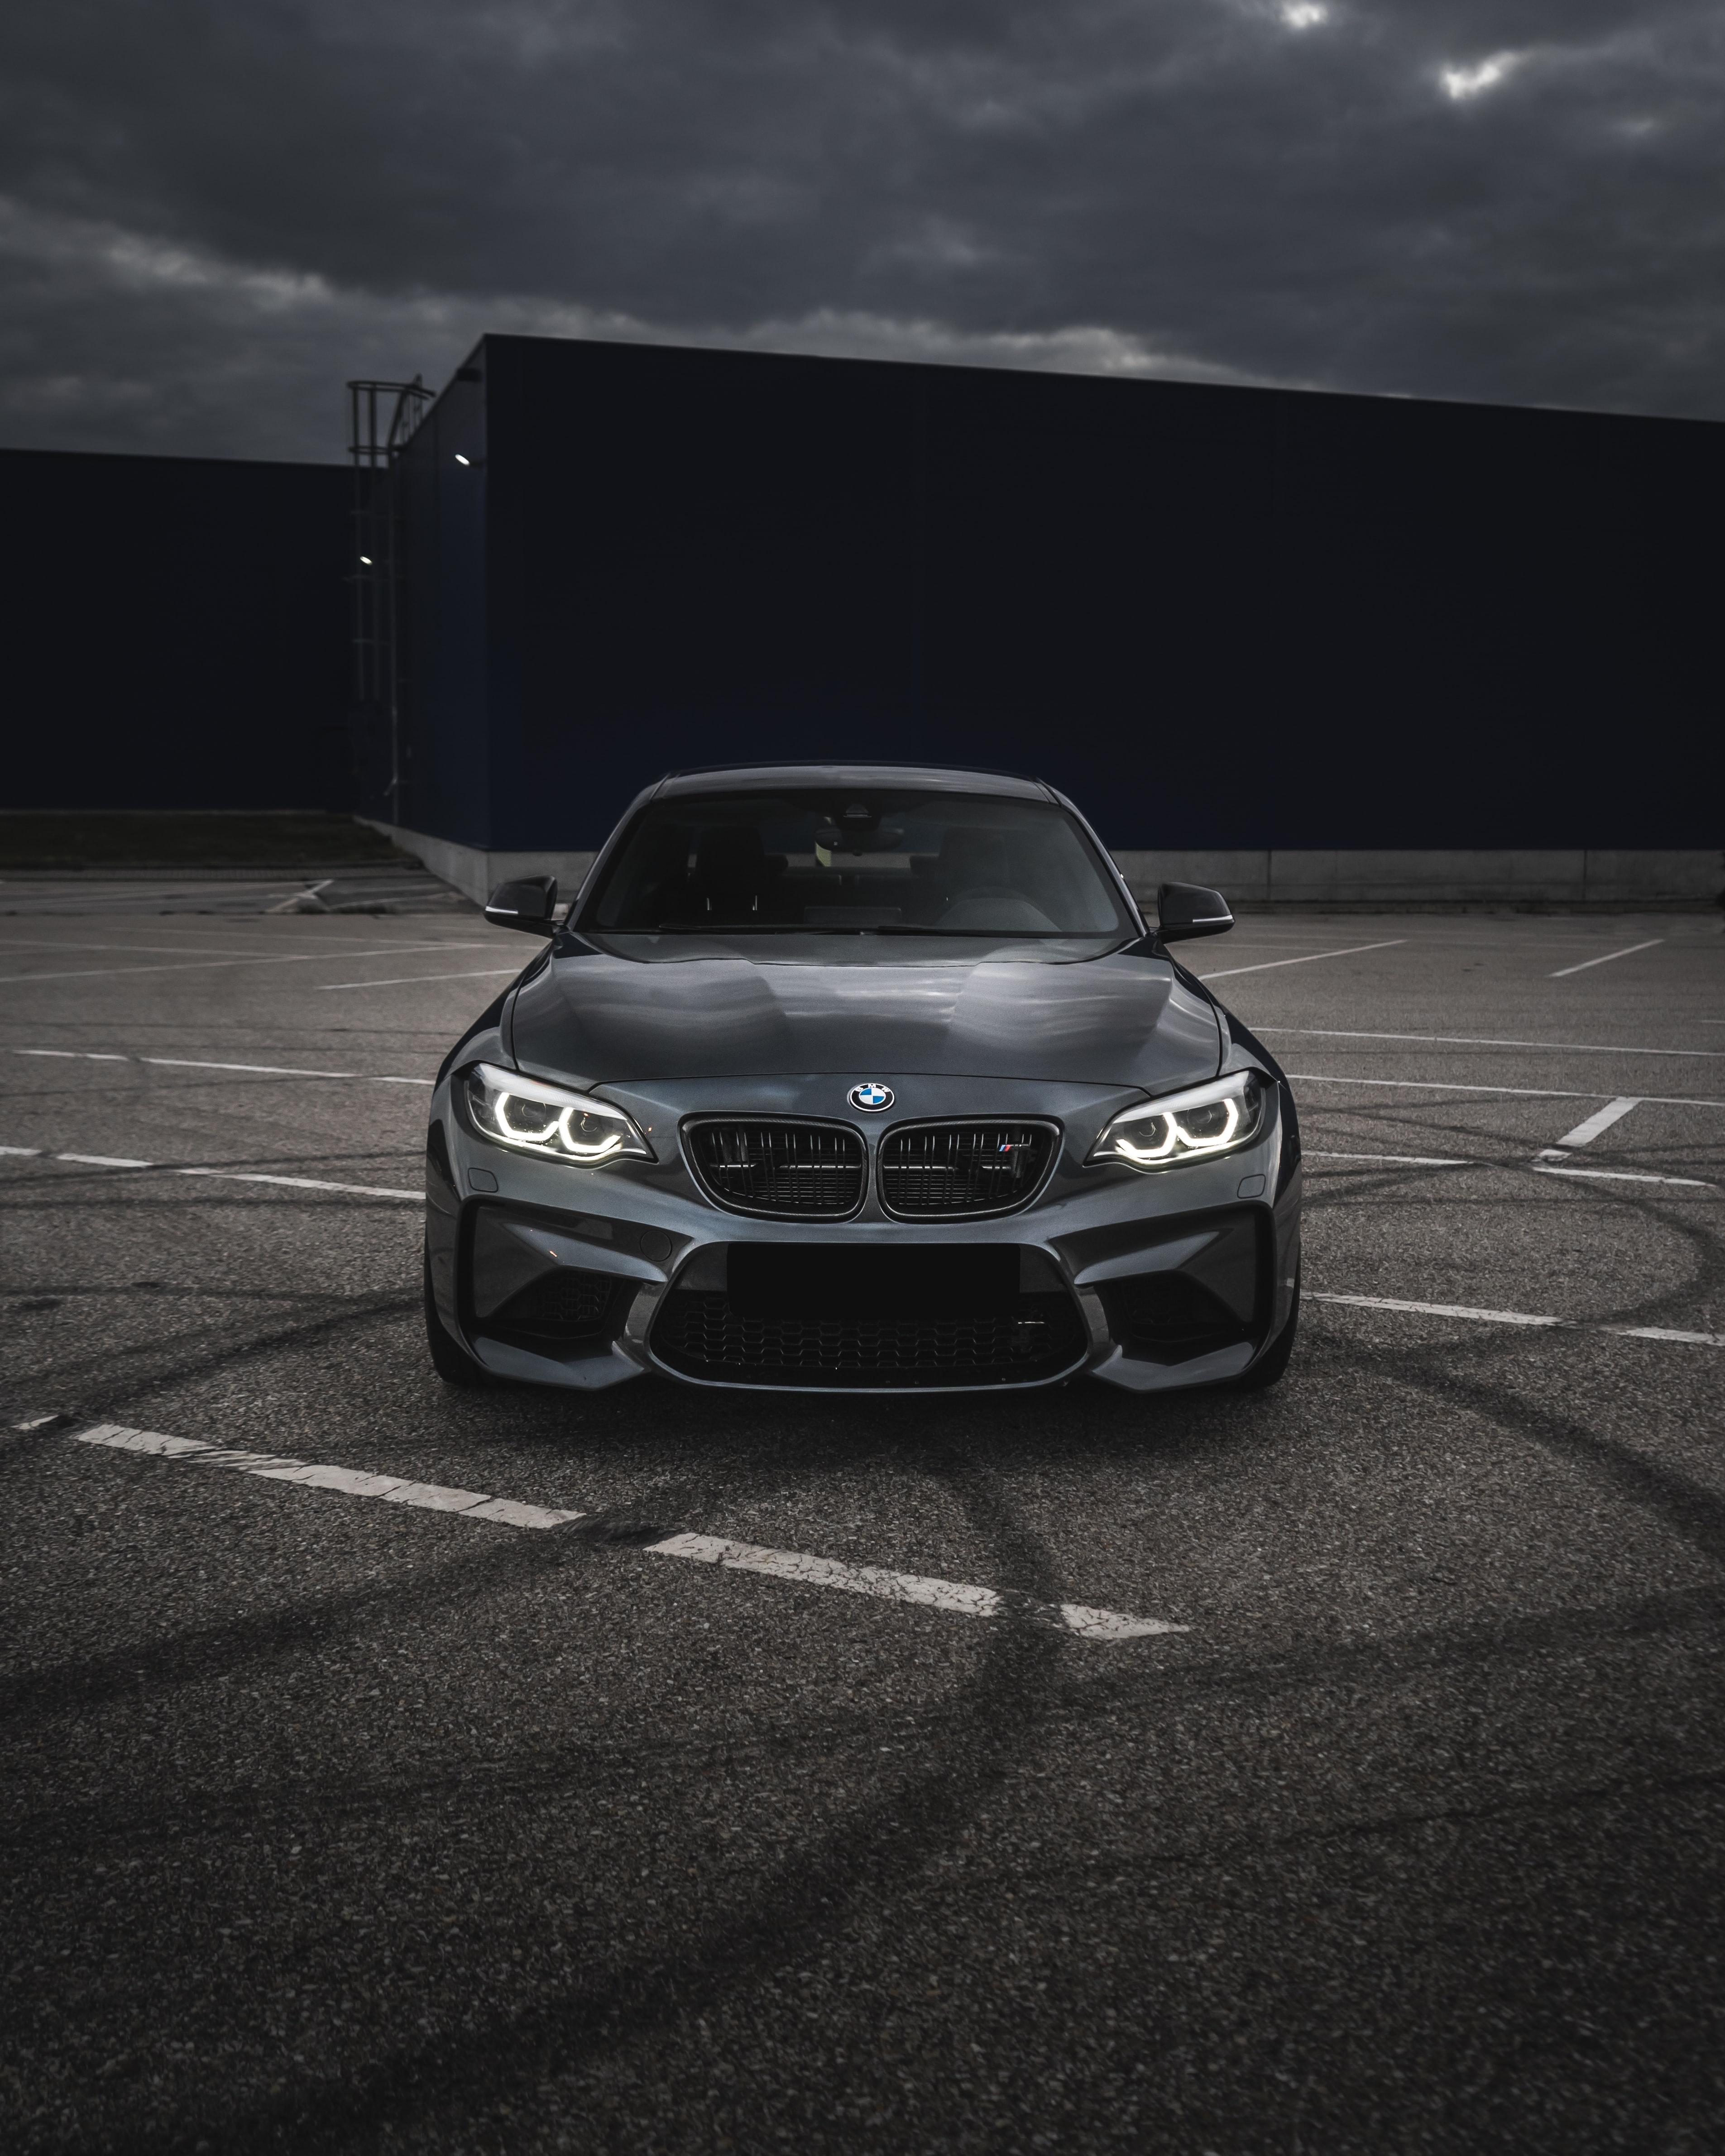 front view, bmw, cars, bmw m3, car, grey iphone wallpaper